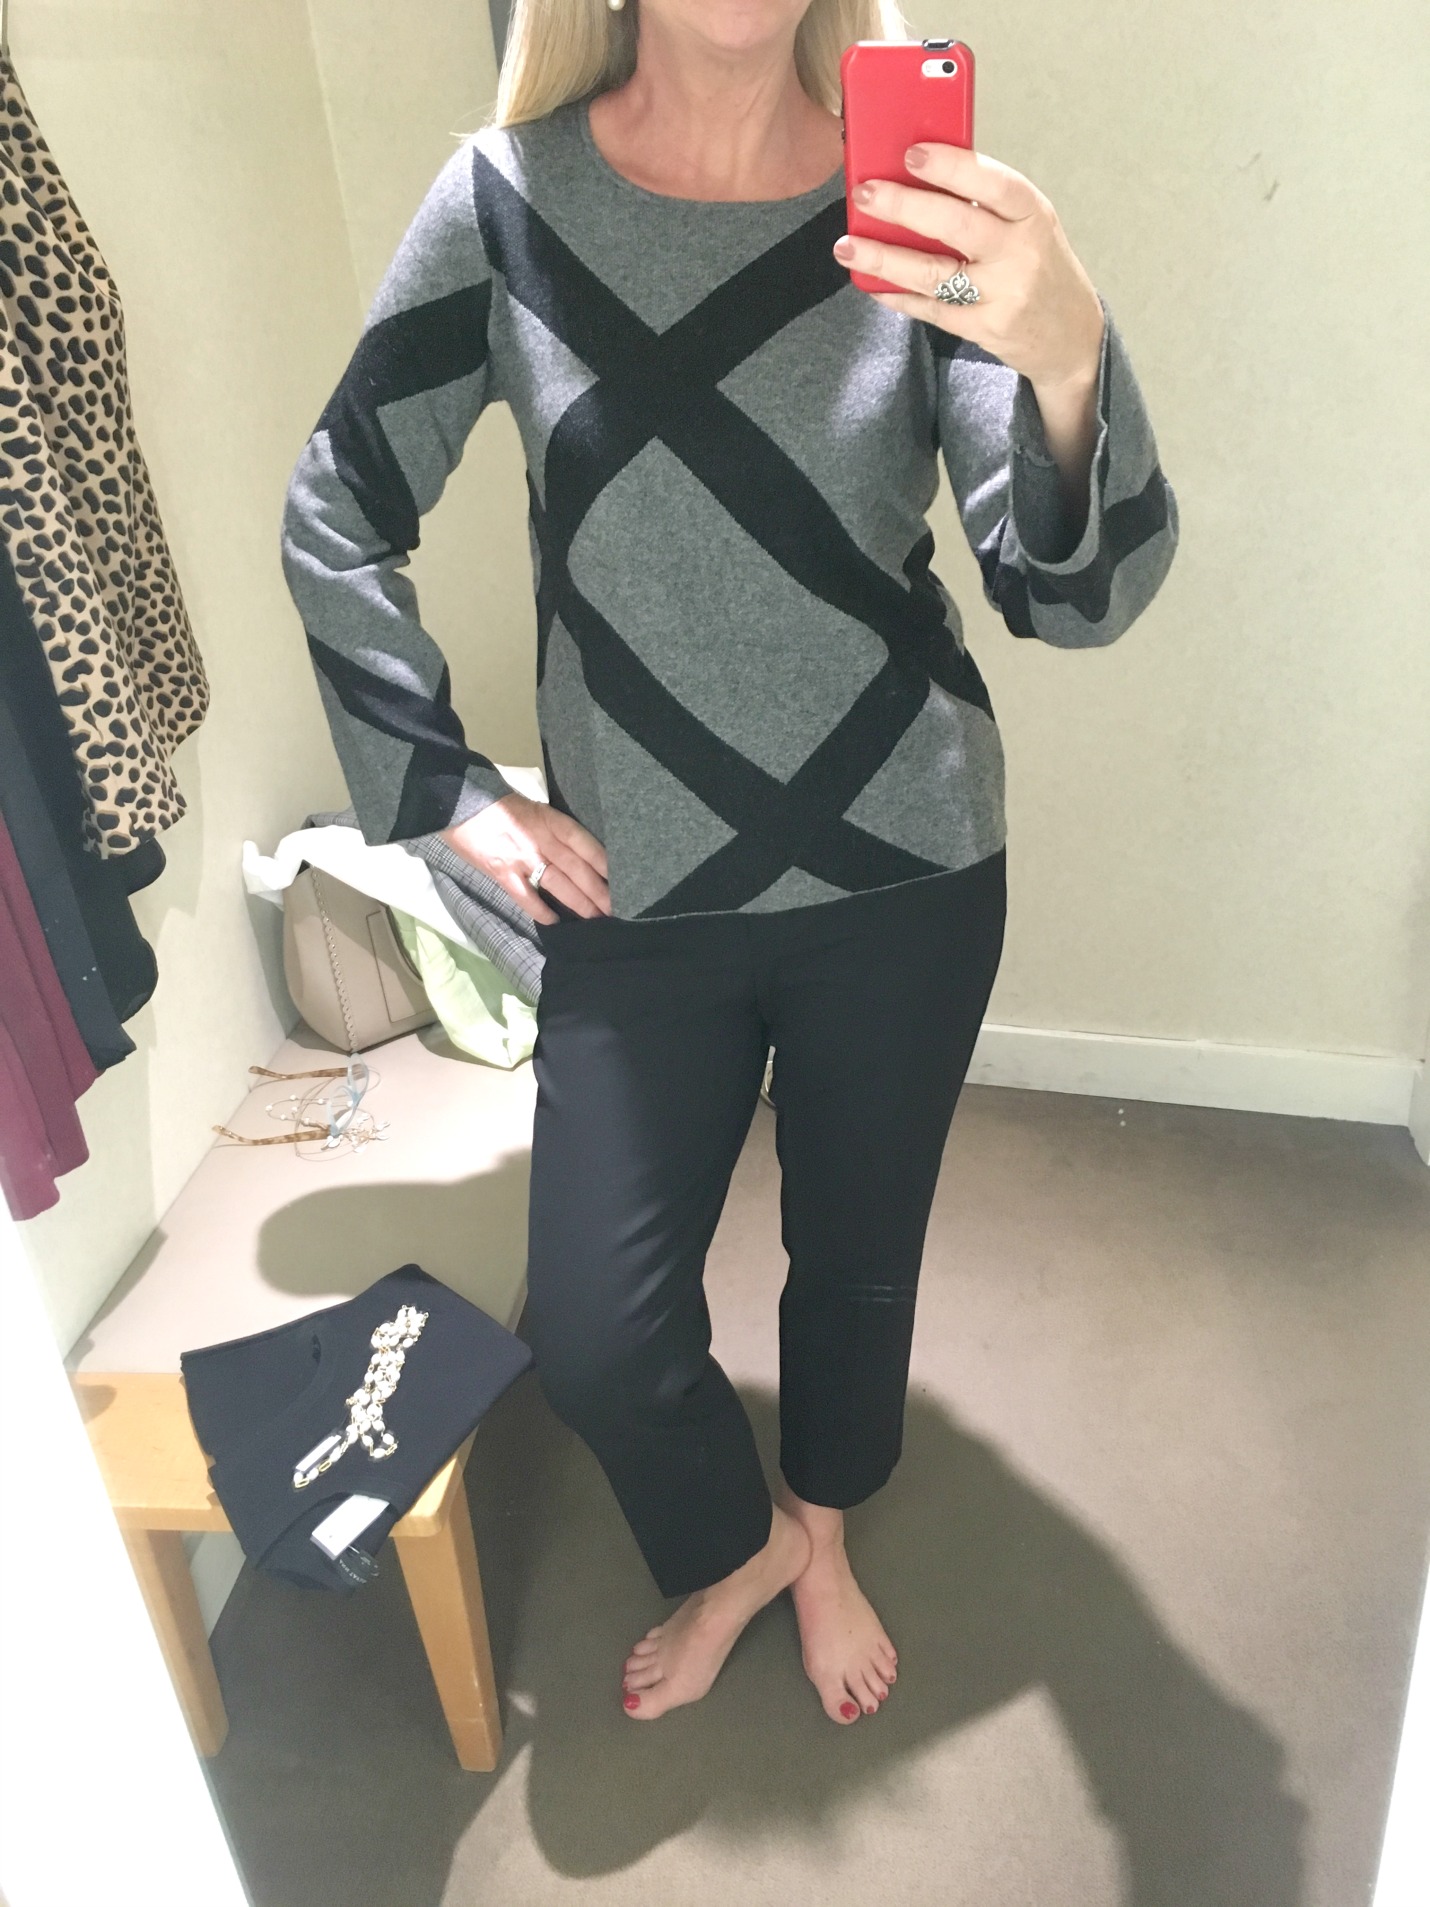 Ann Taylor Fall Career Clothing Try-On Session